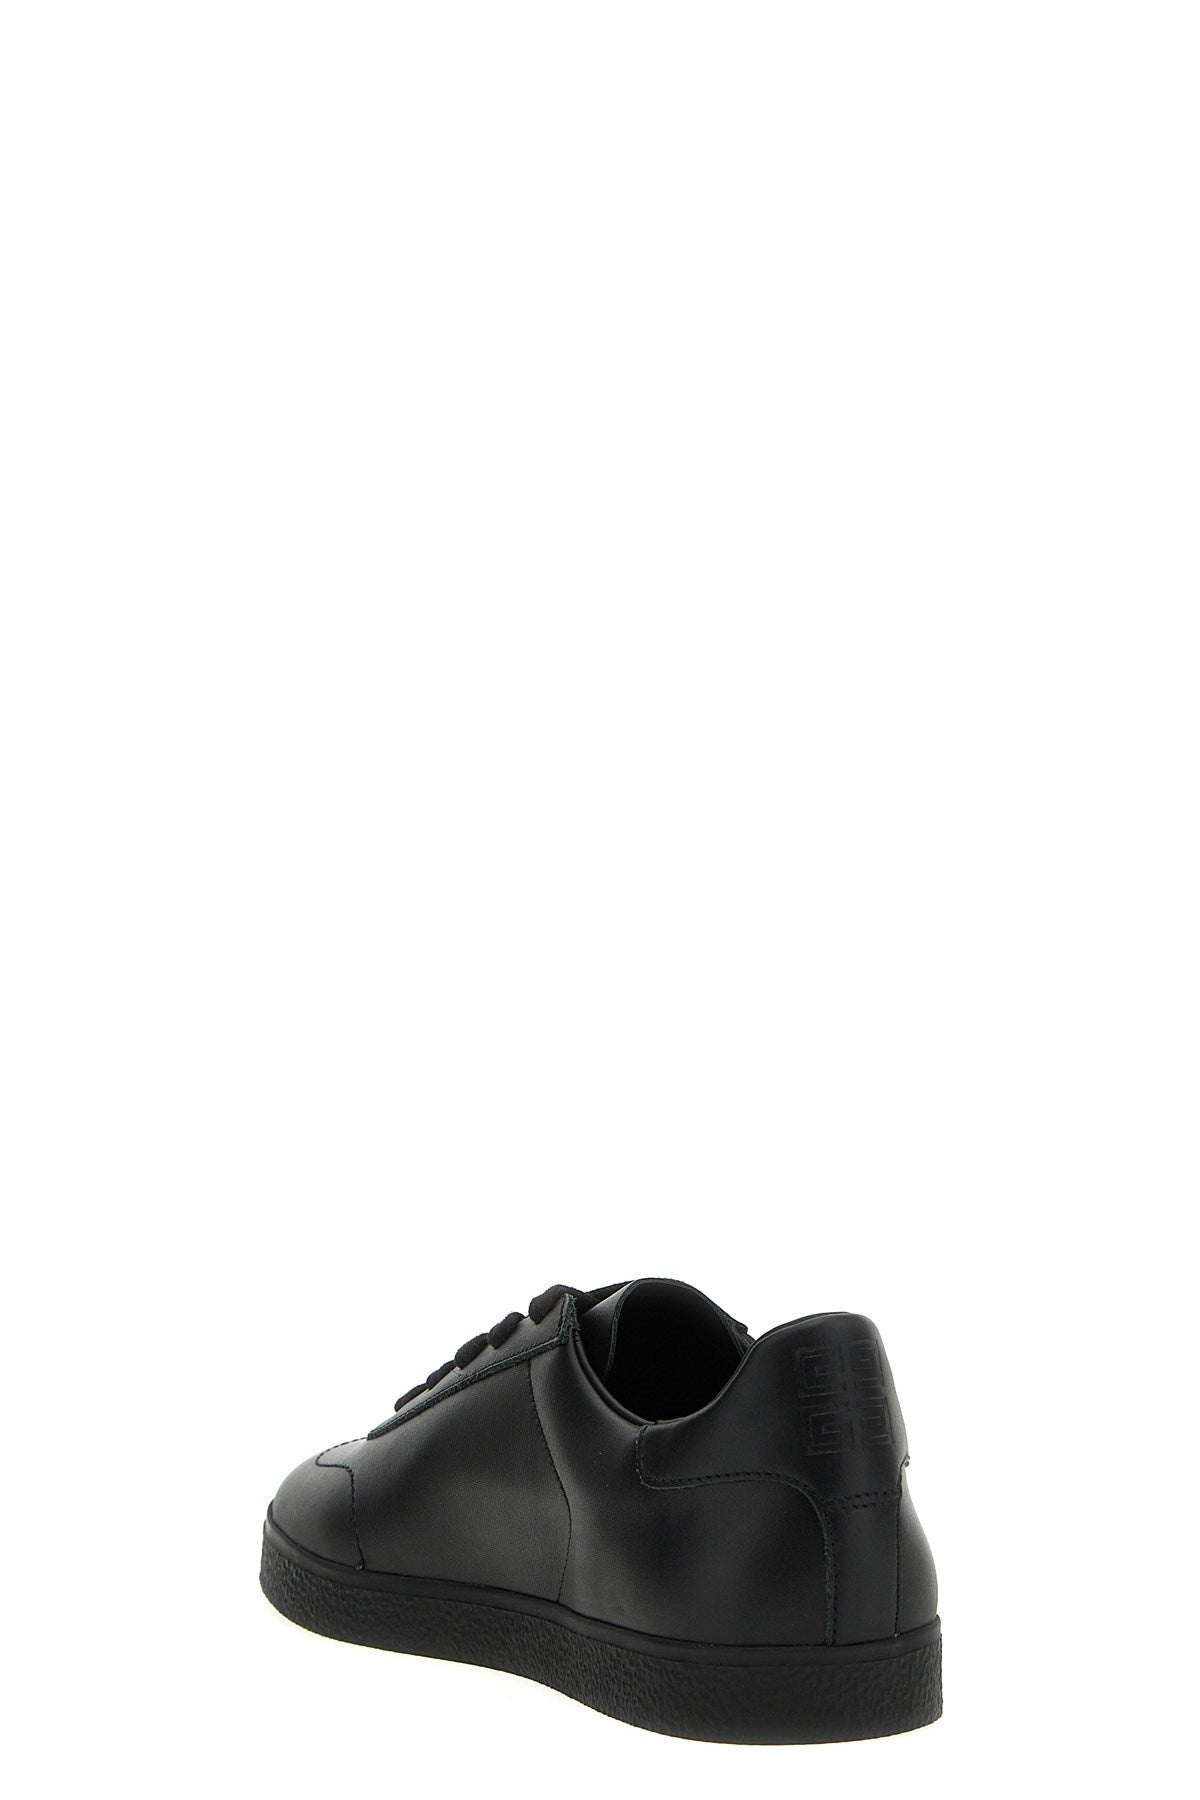 Givenchy Men 'Town' Sneakers - 2